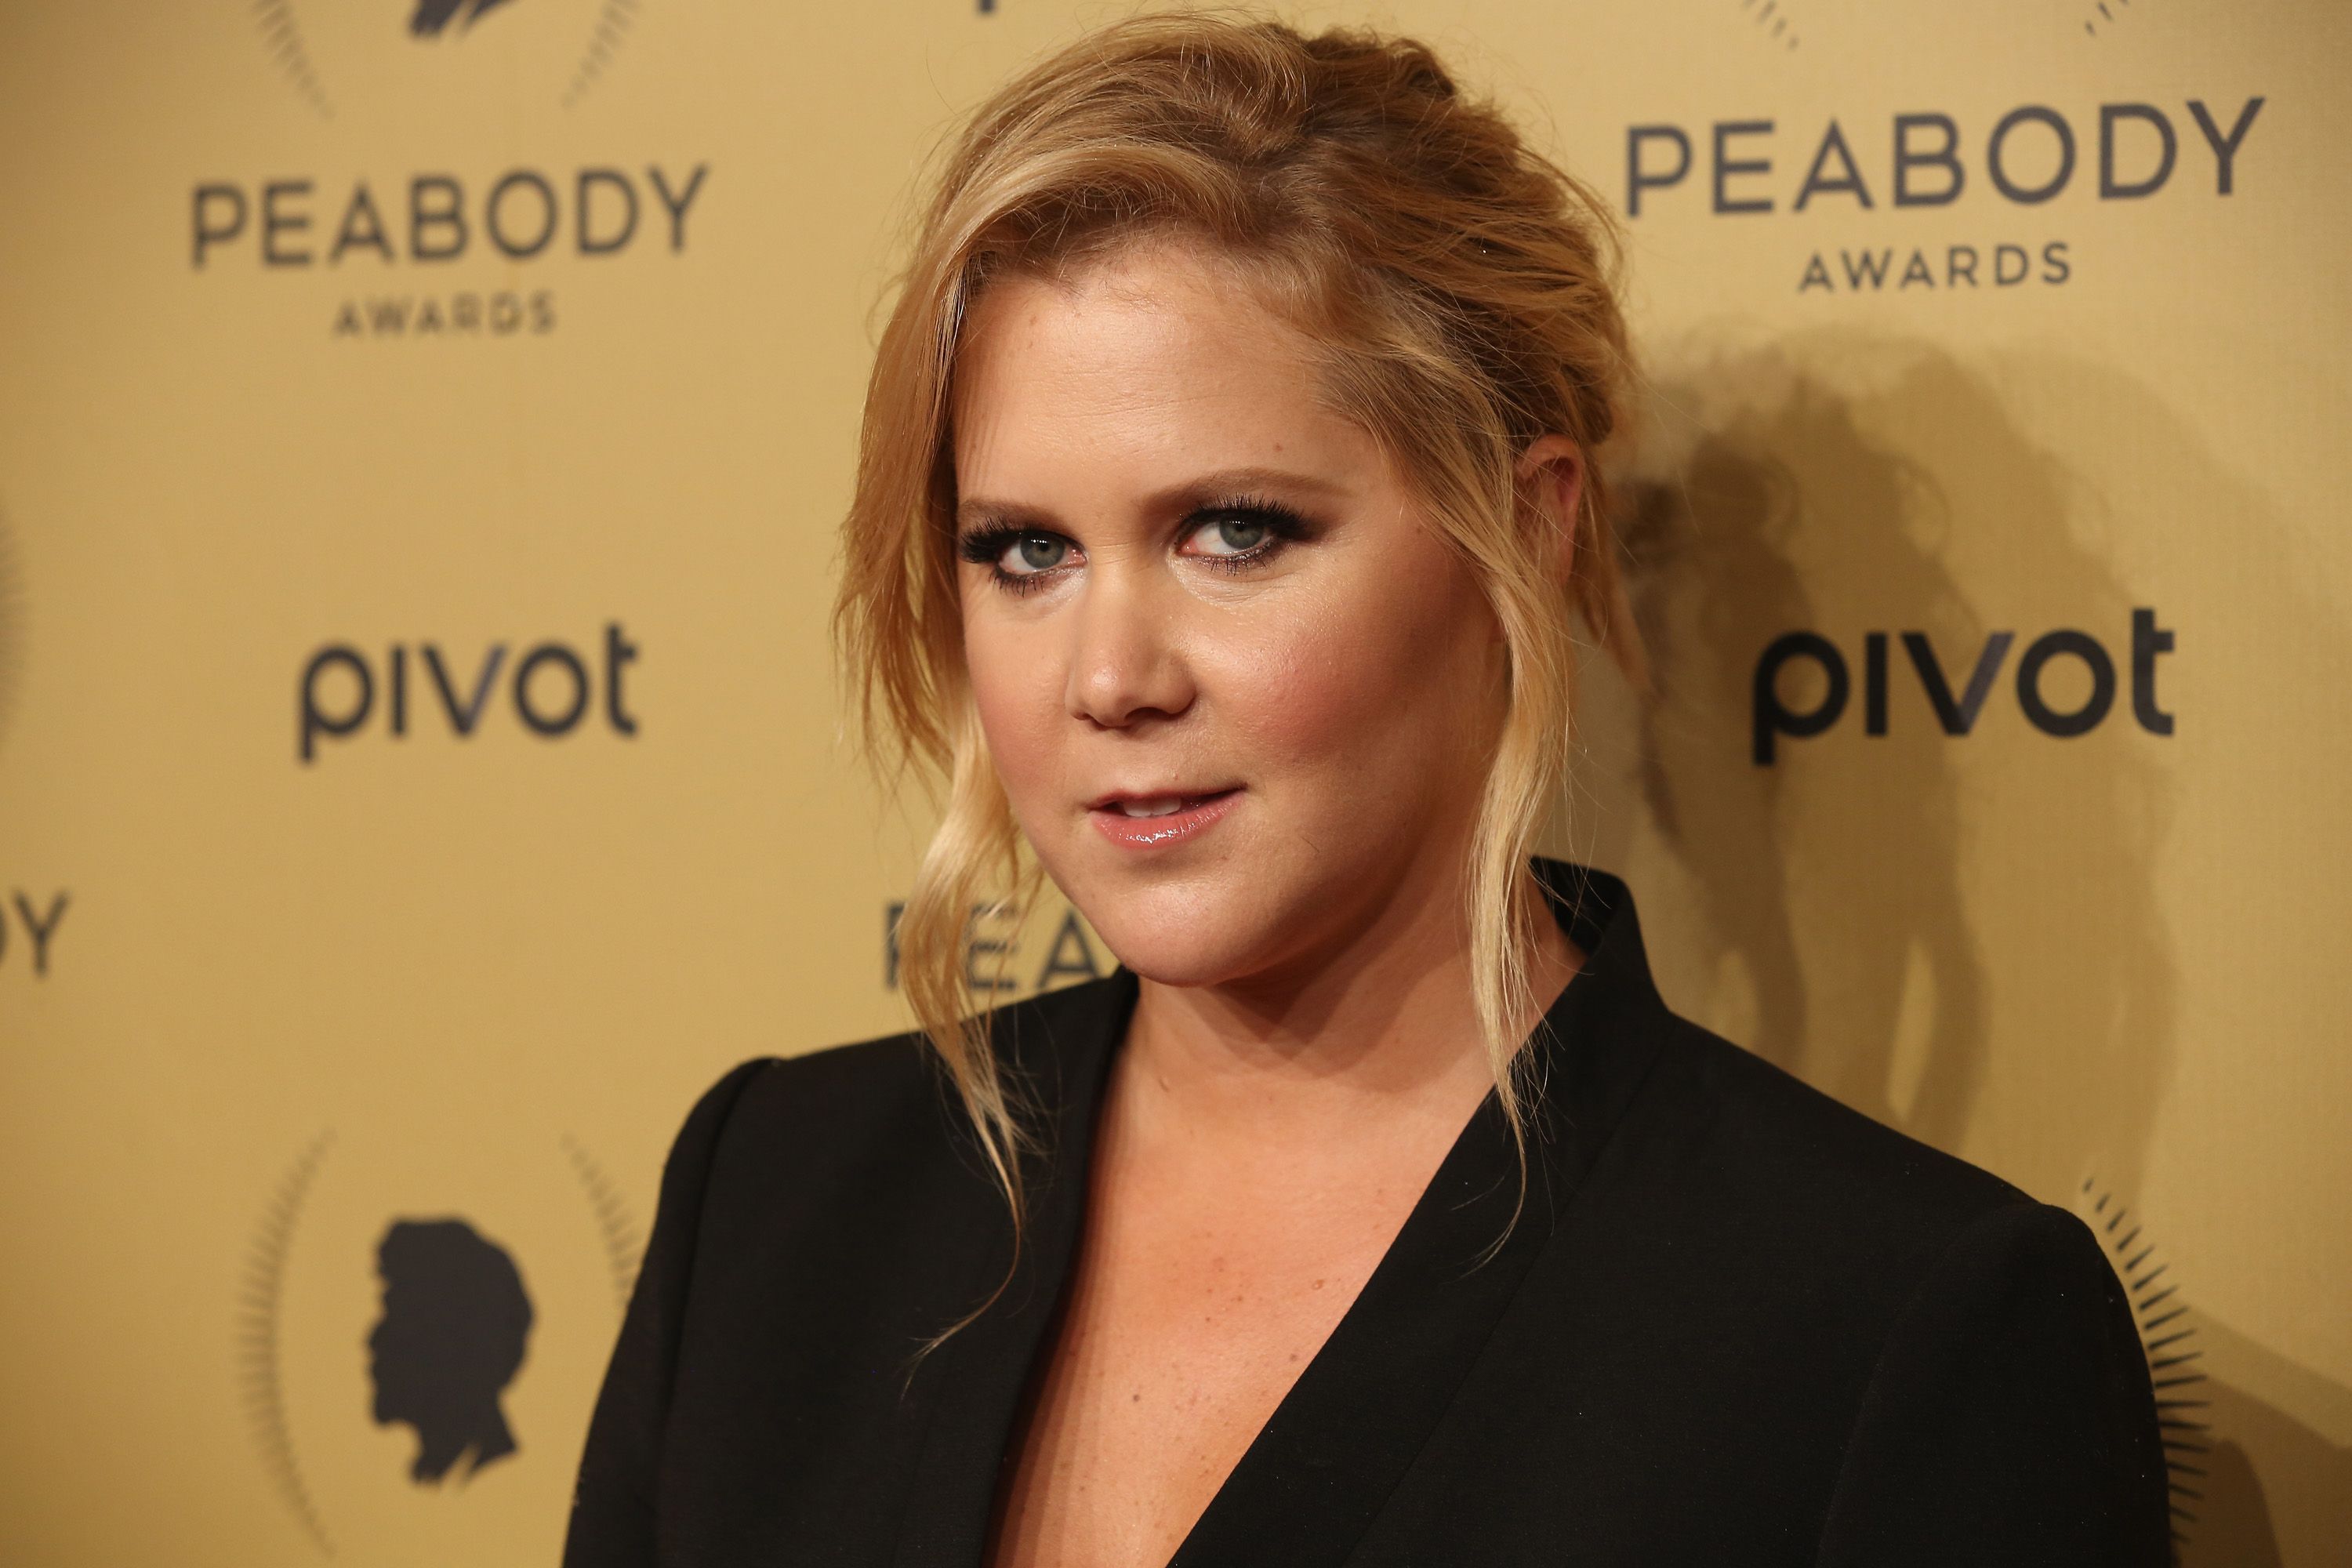  Amy Schumer at The 74th Annual Peabody Awards Ceremony at Cipriani Wall Street on May 31, 2015. | Photo: Getty Images